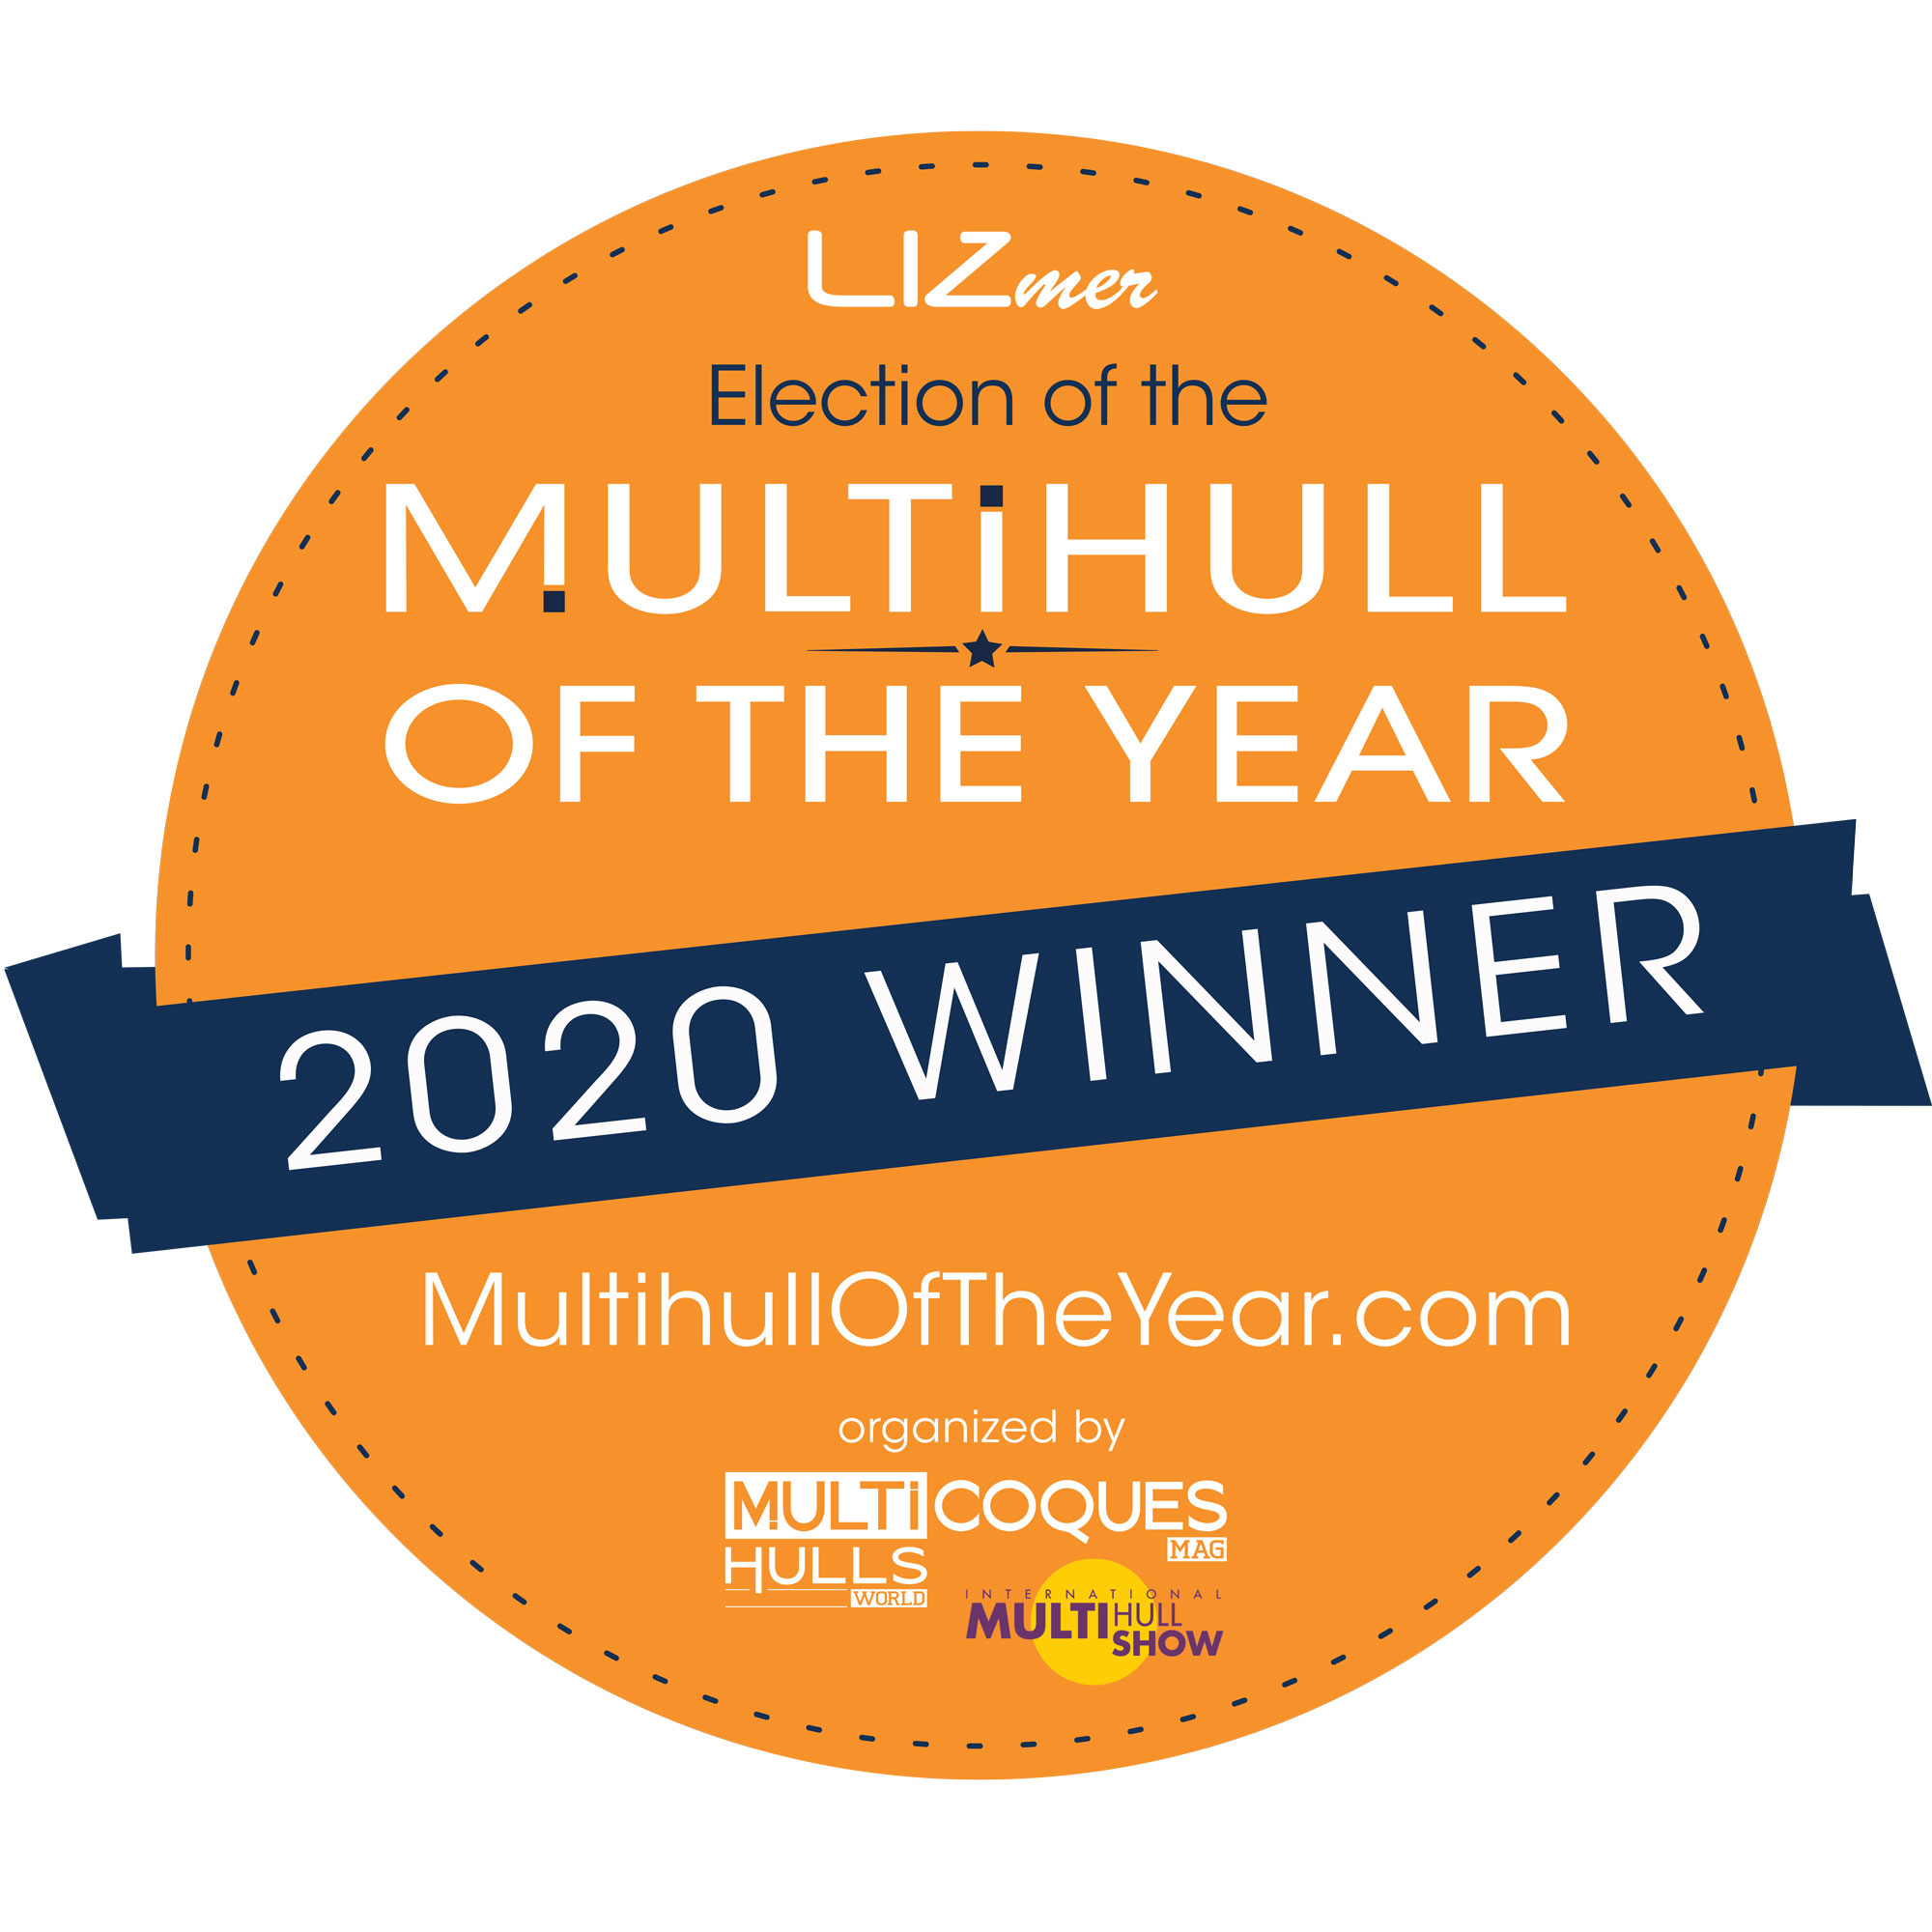 Multihull of the Year